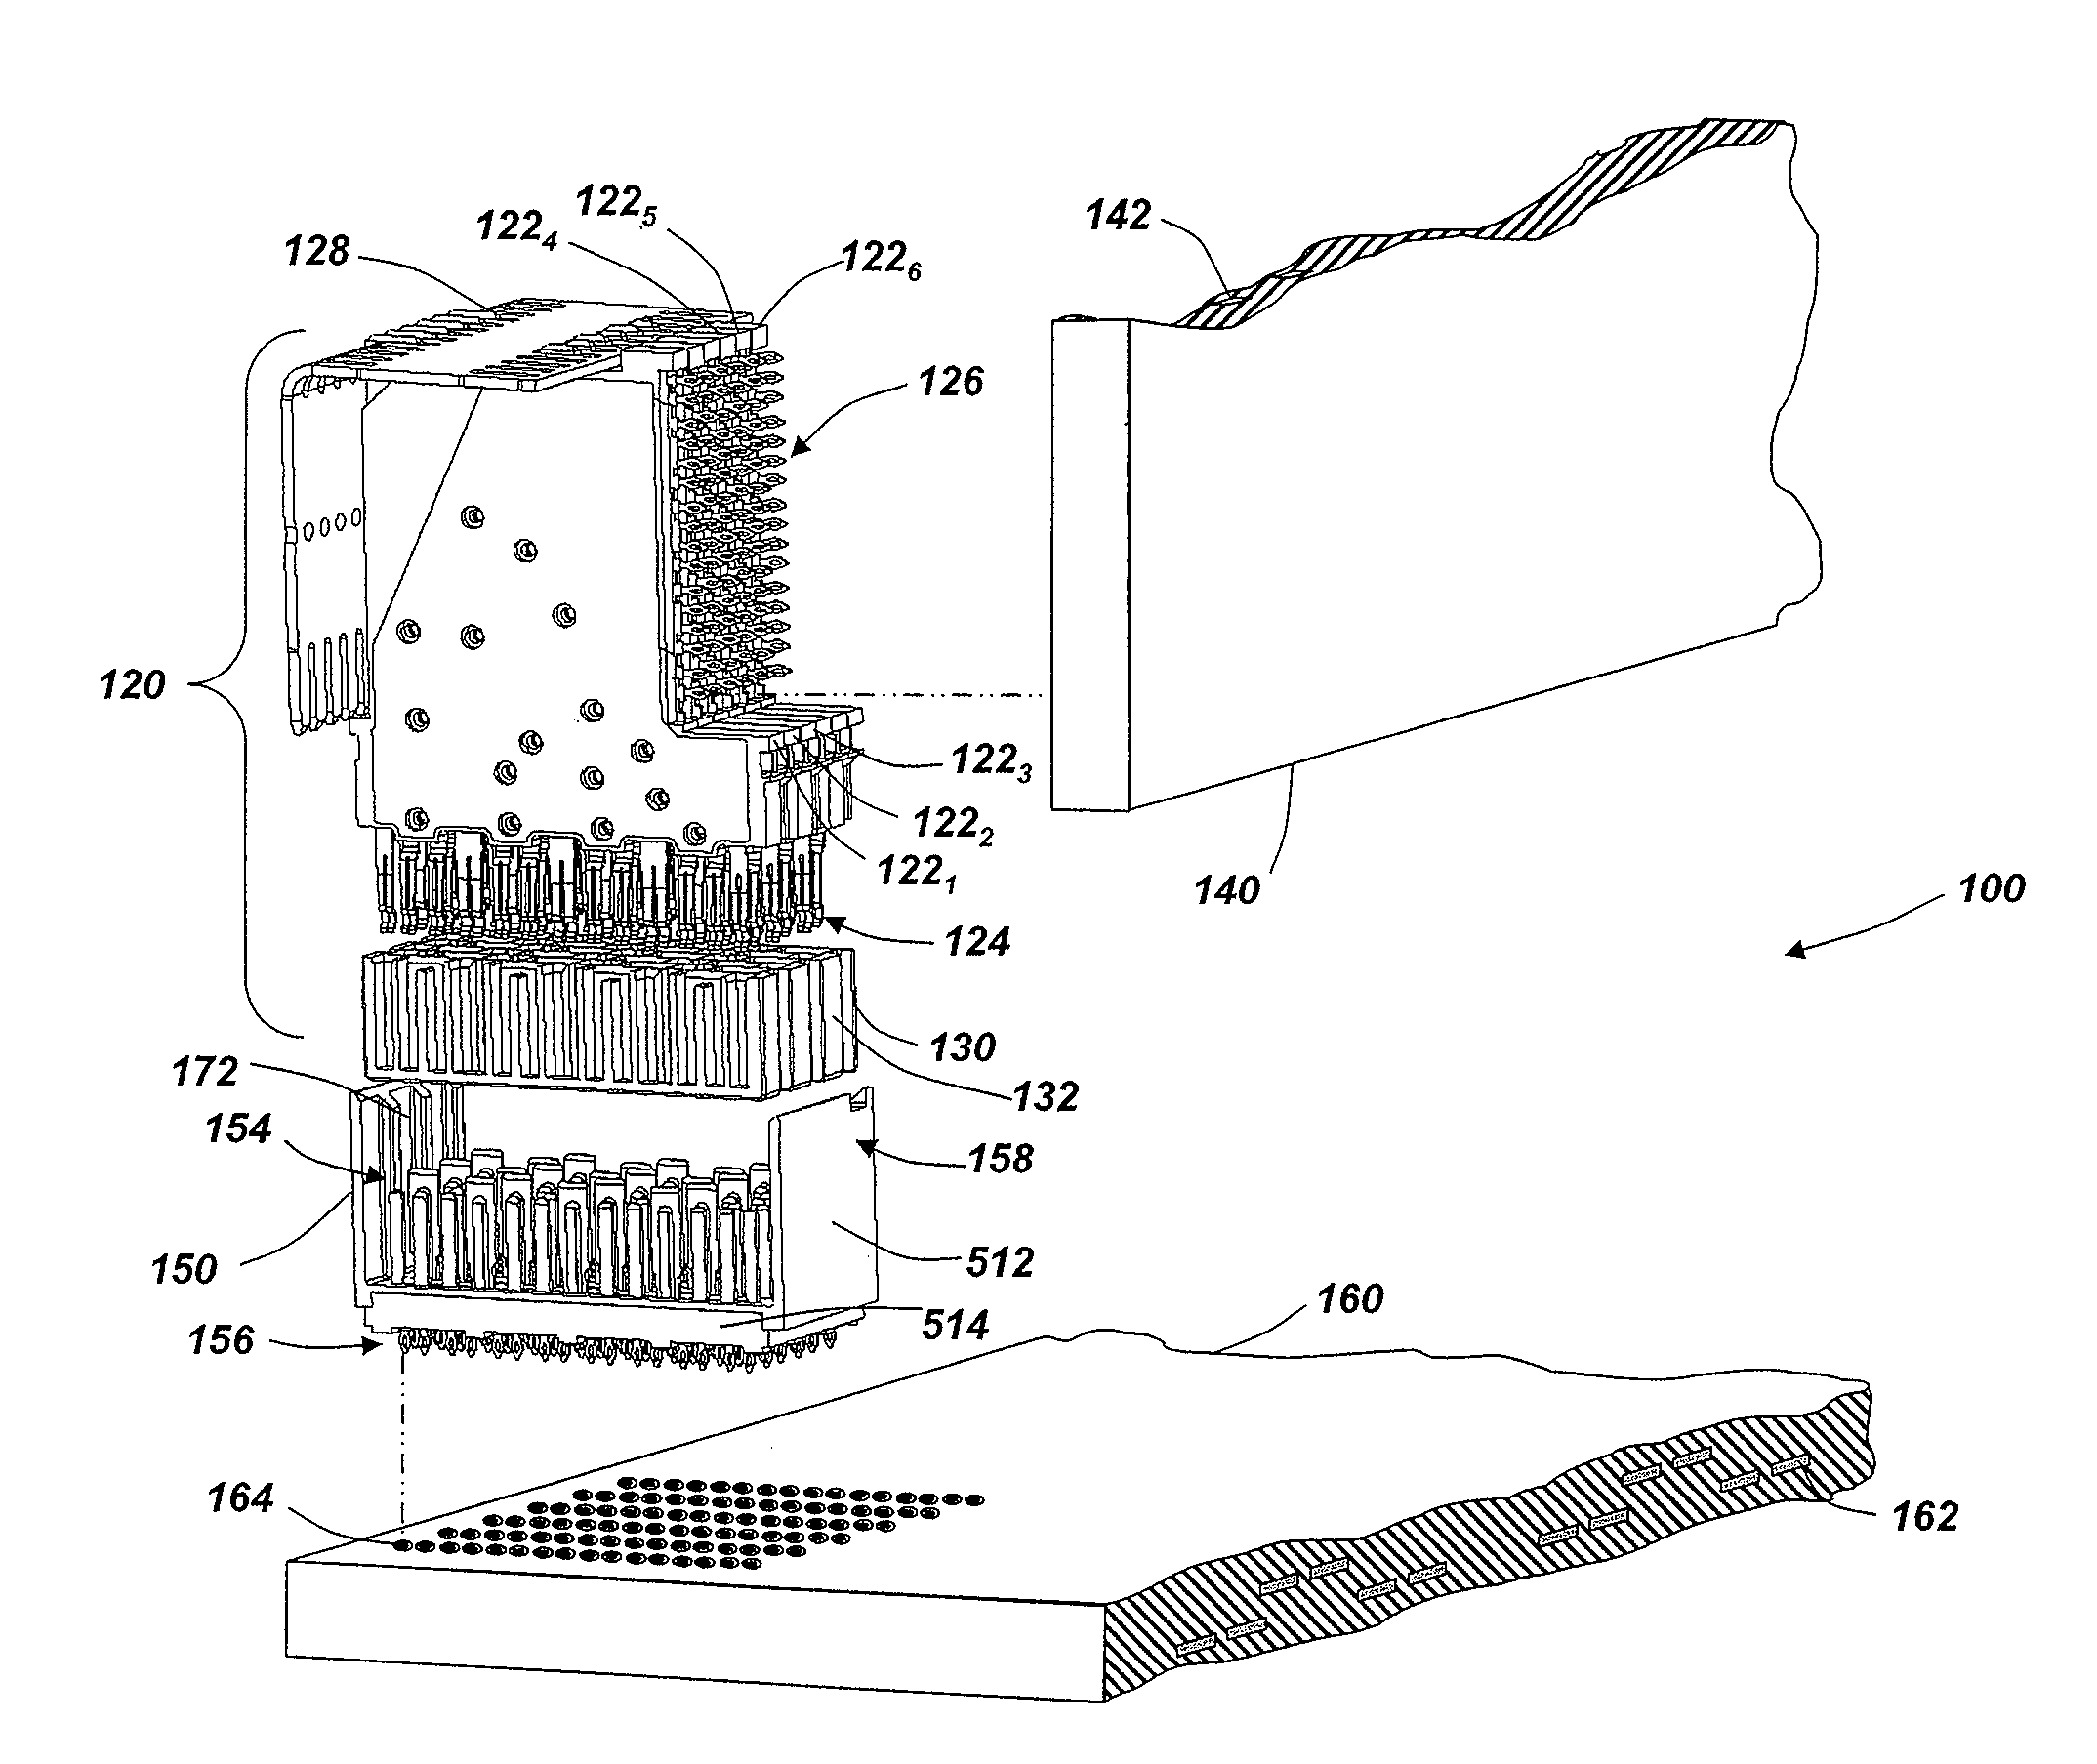 High speed, high density electrical connector with selective positioning of lossy regions